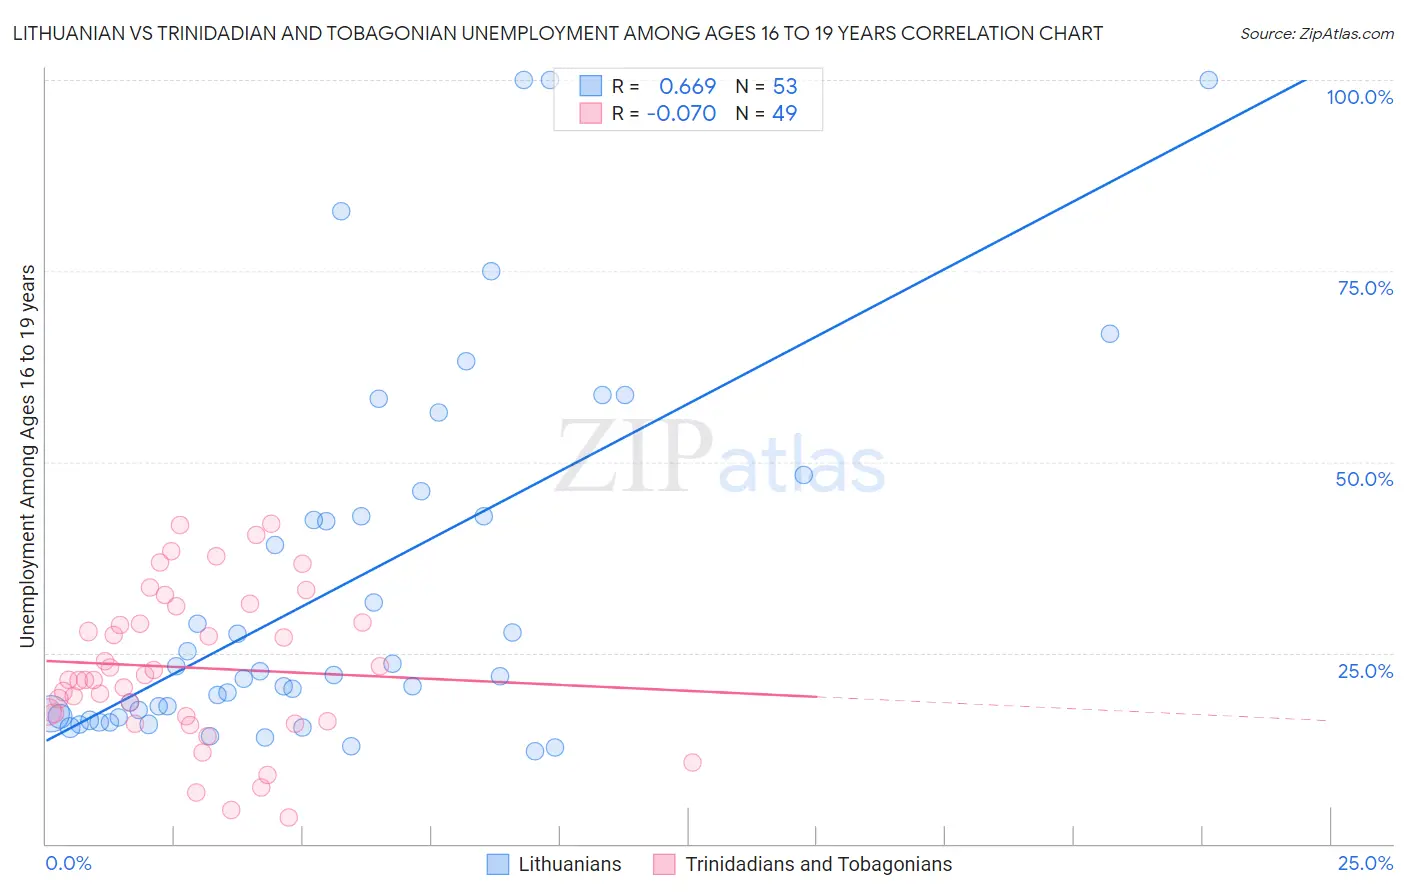 Lithuanian vs Trinidadian and Tobagonian Unemployment Among Ages 16 to 19 years